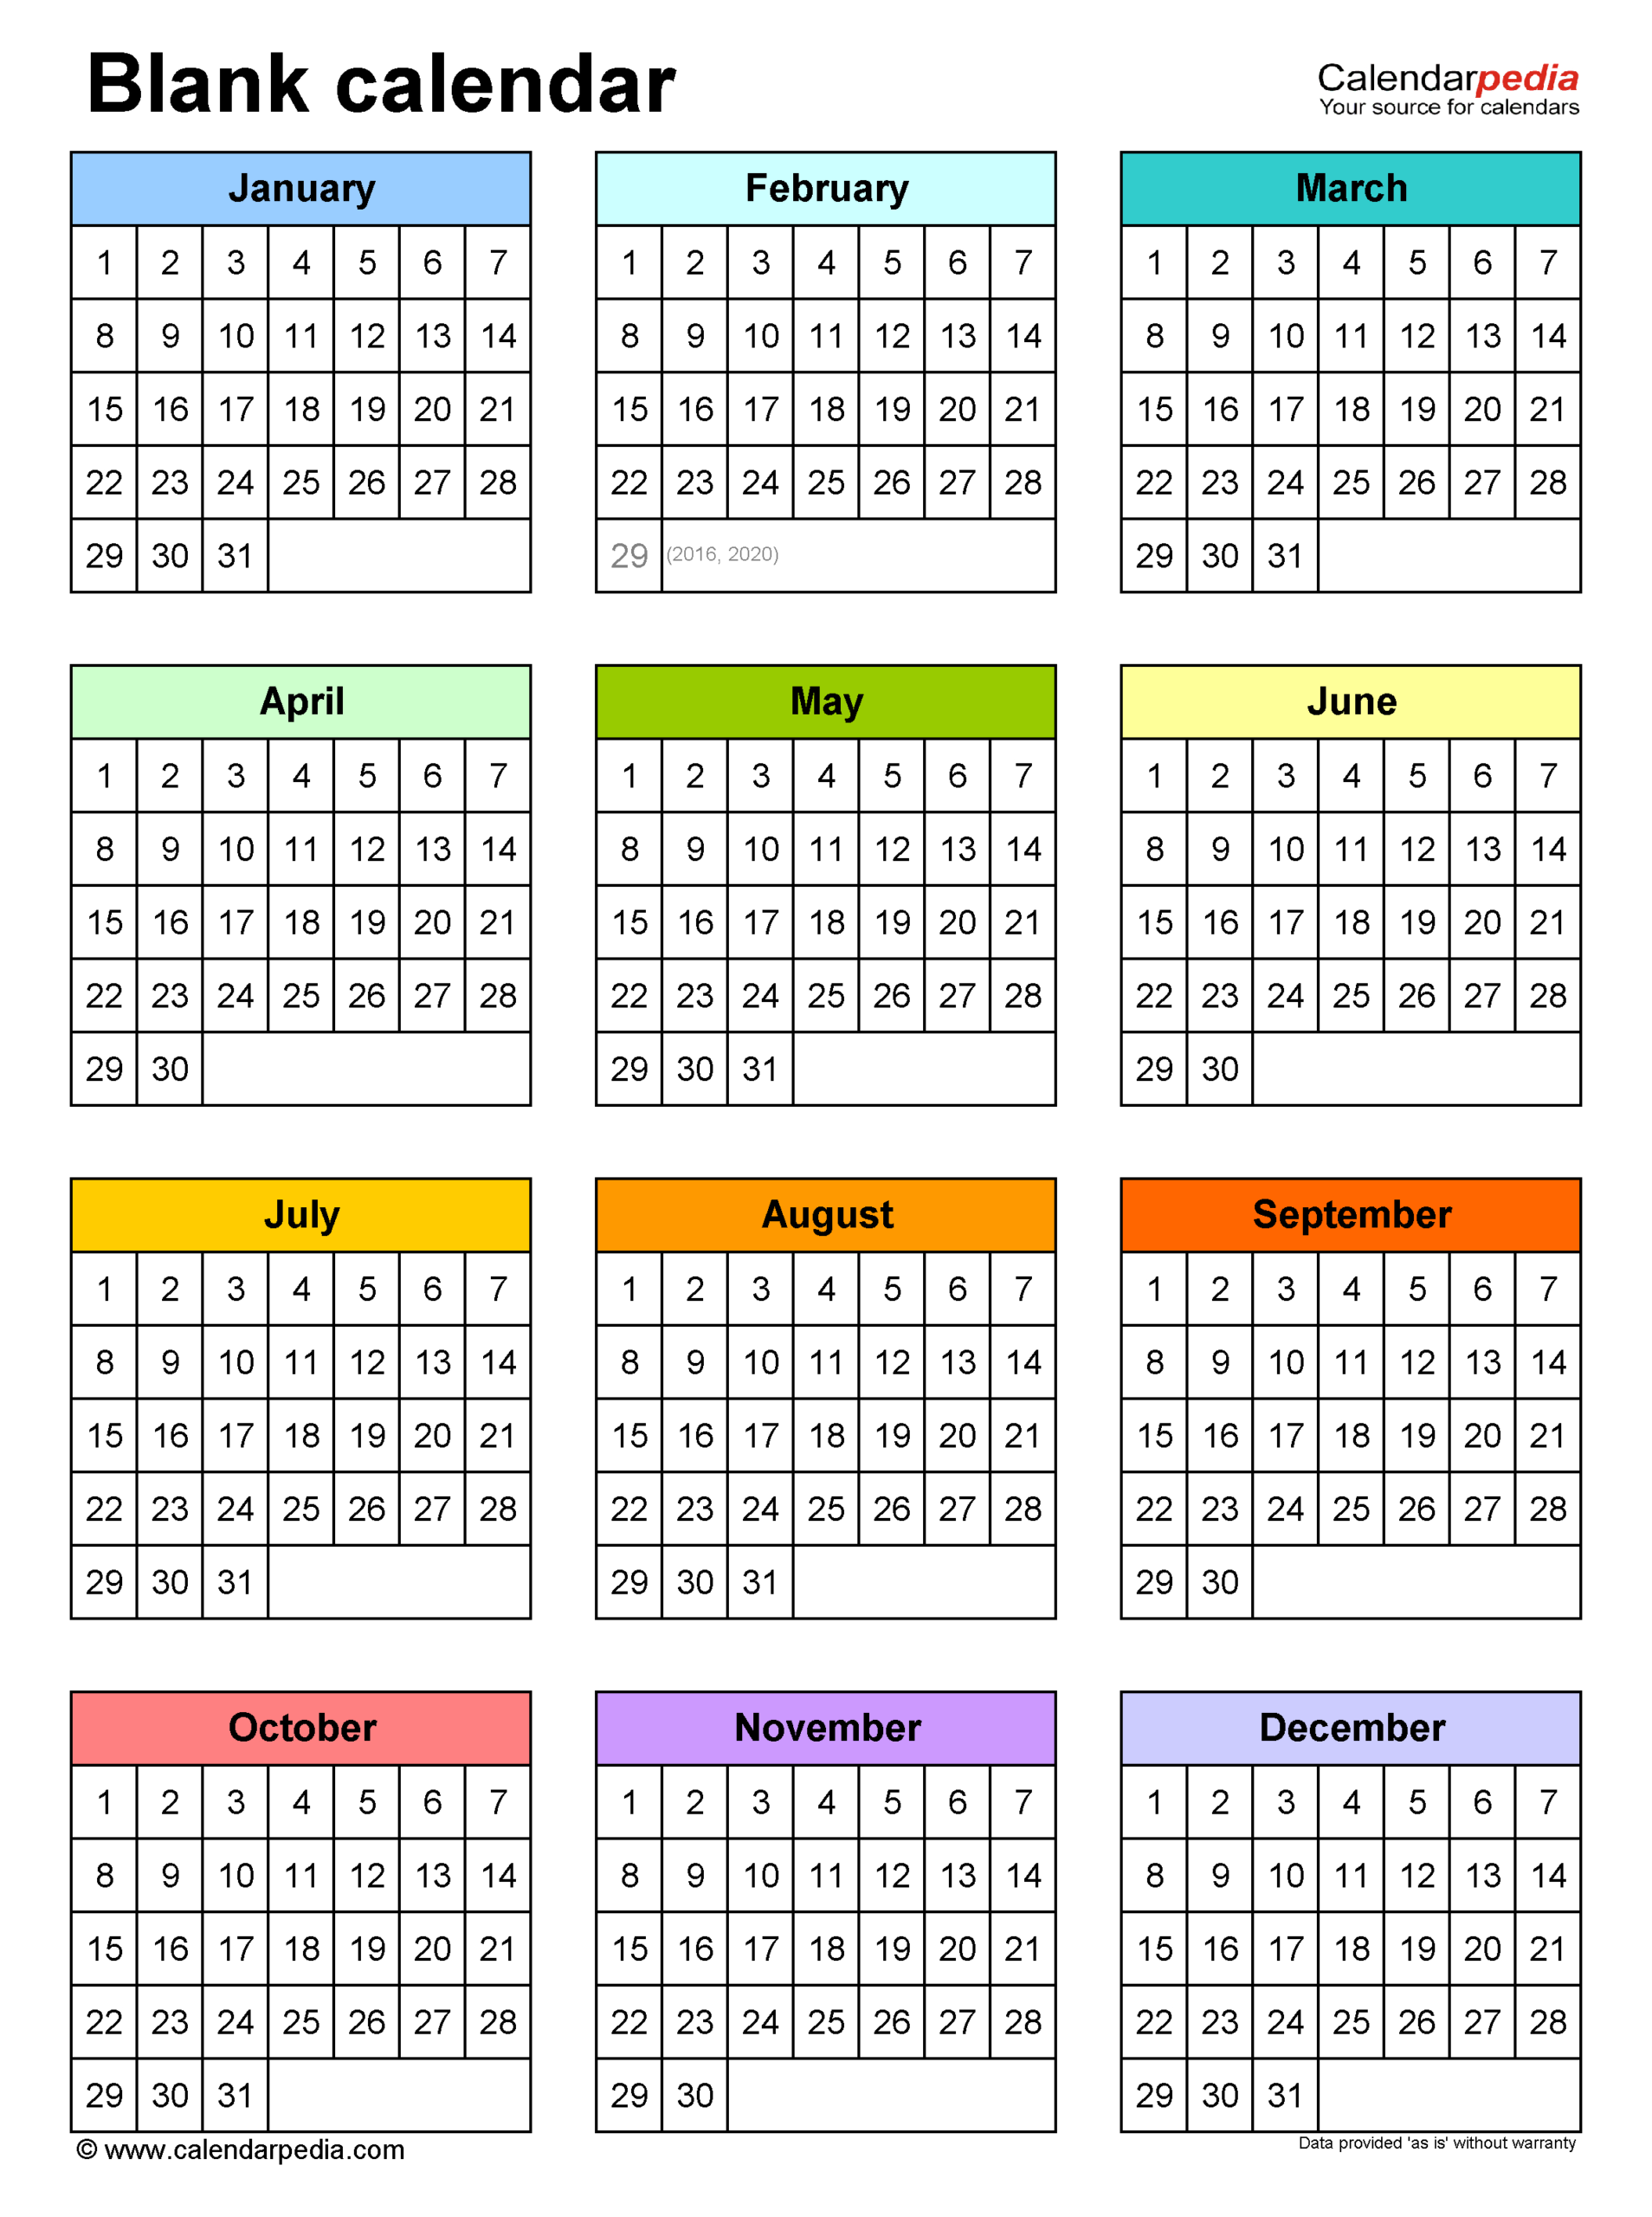 Full Year Calendar Designed For Printing On One Page Calendar 